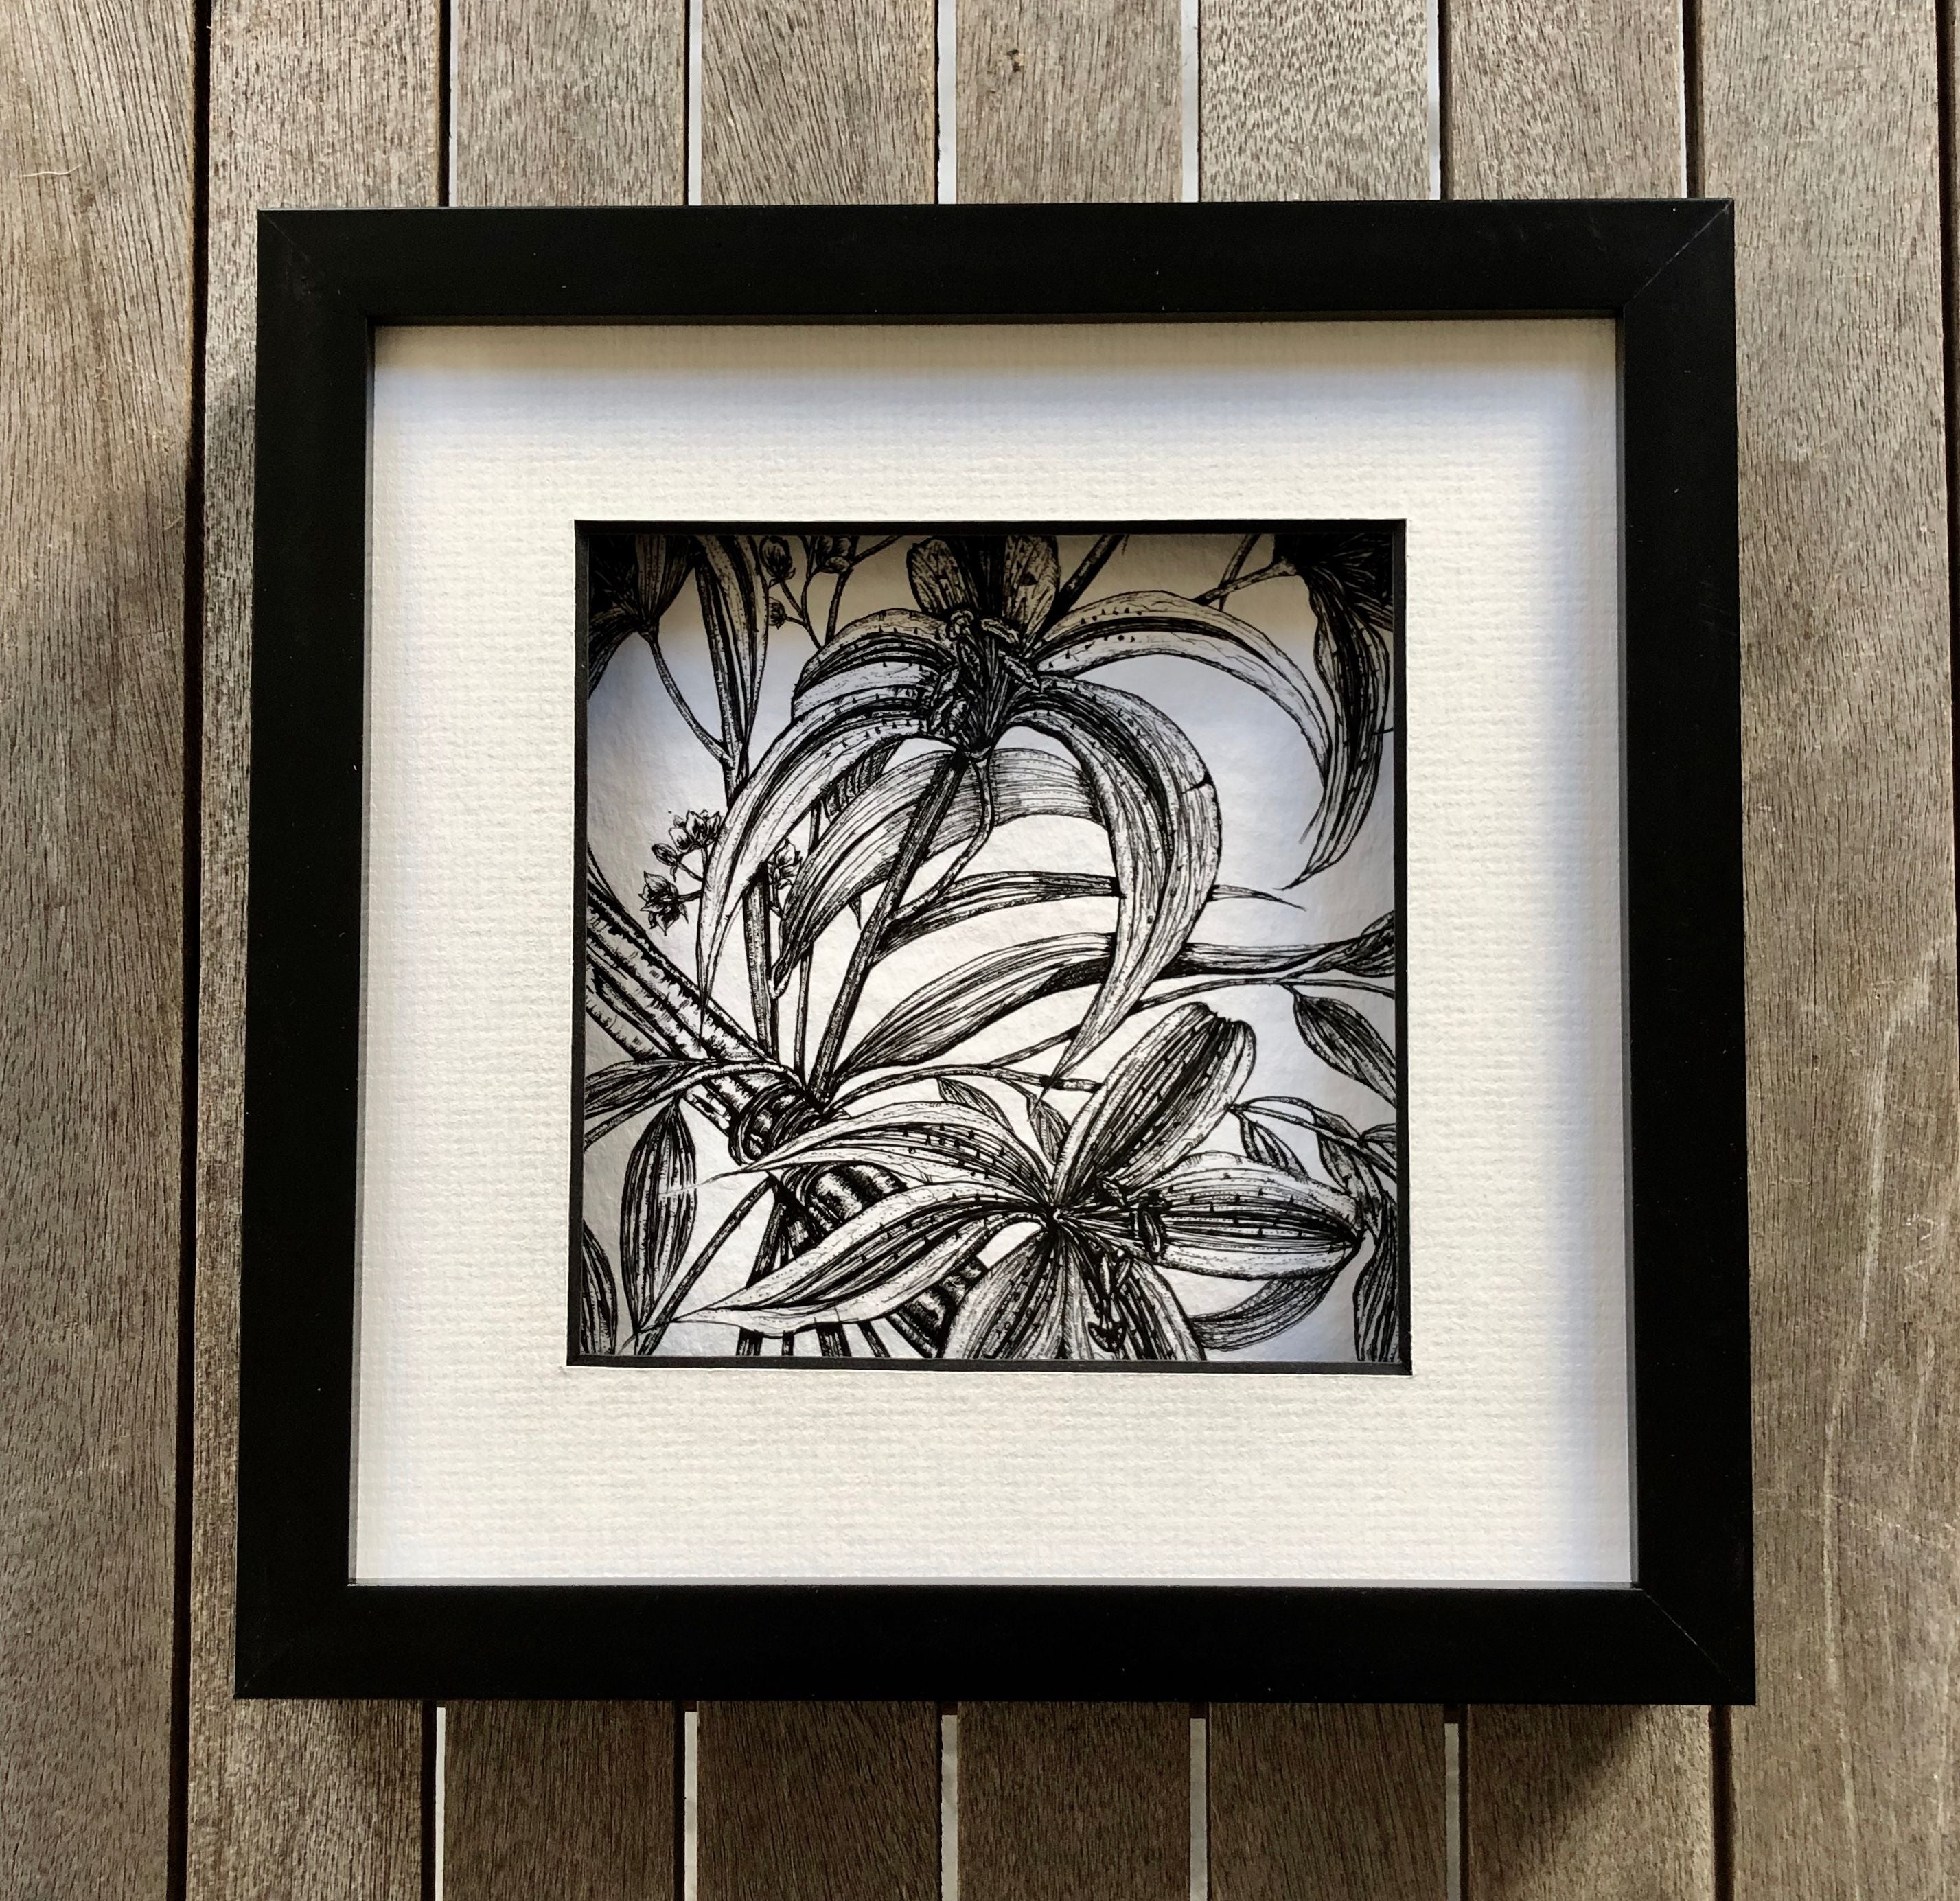 Detailed illustration of stargazer lilies and cinnamon in a black frame.